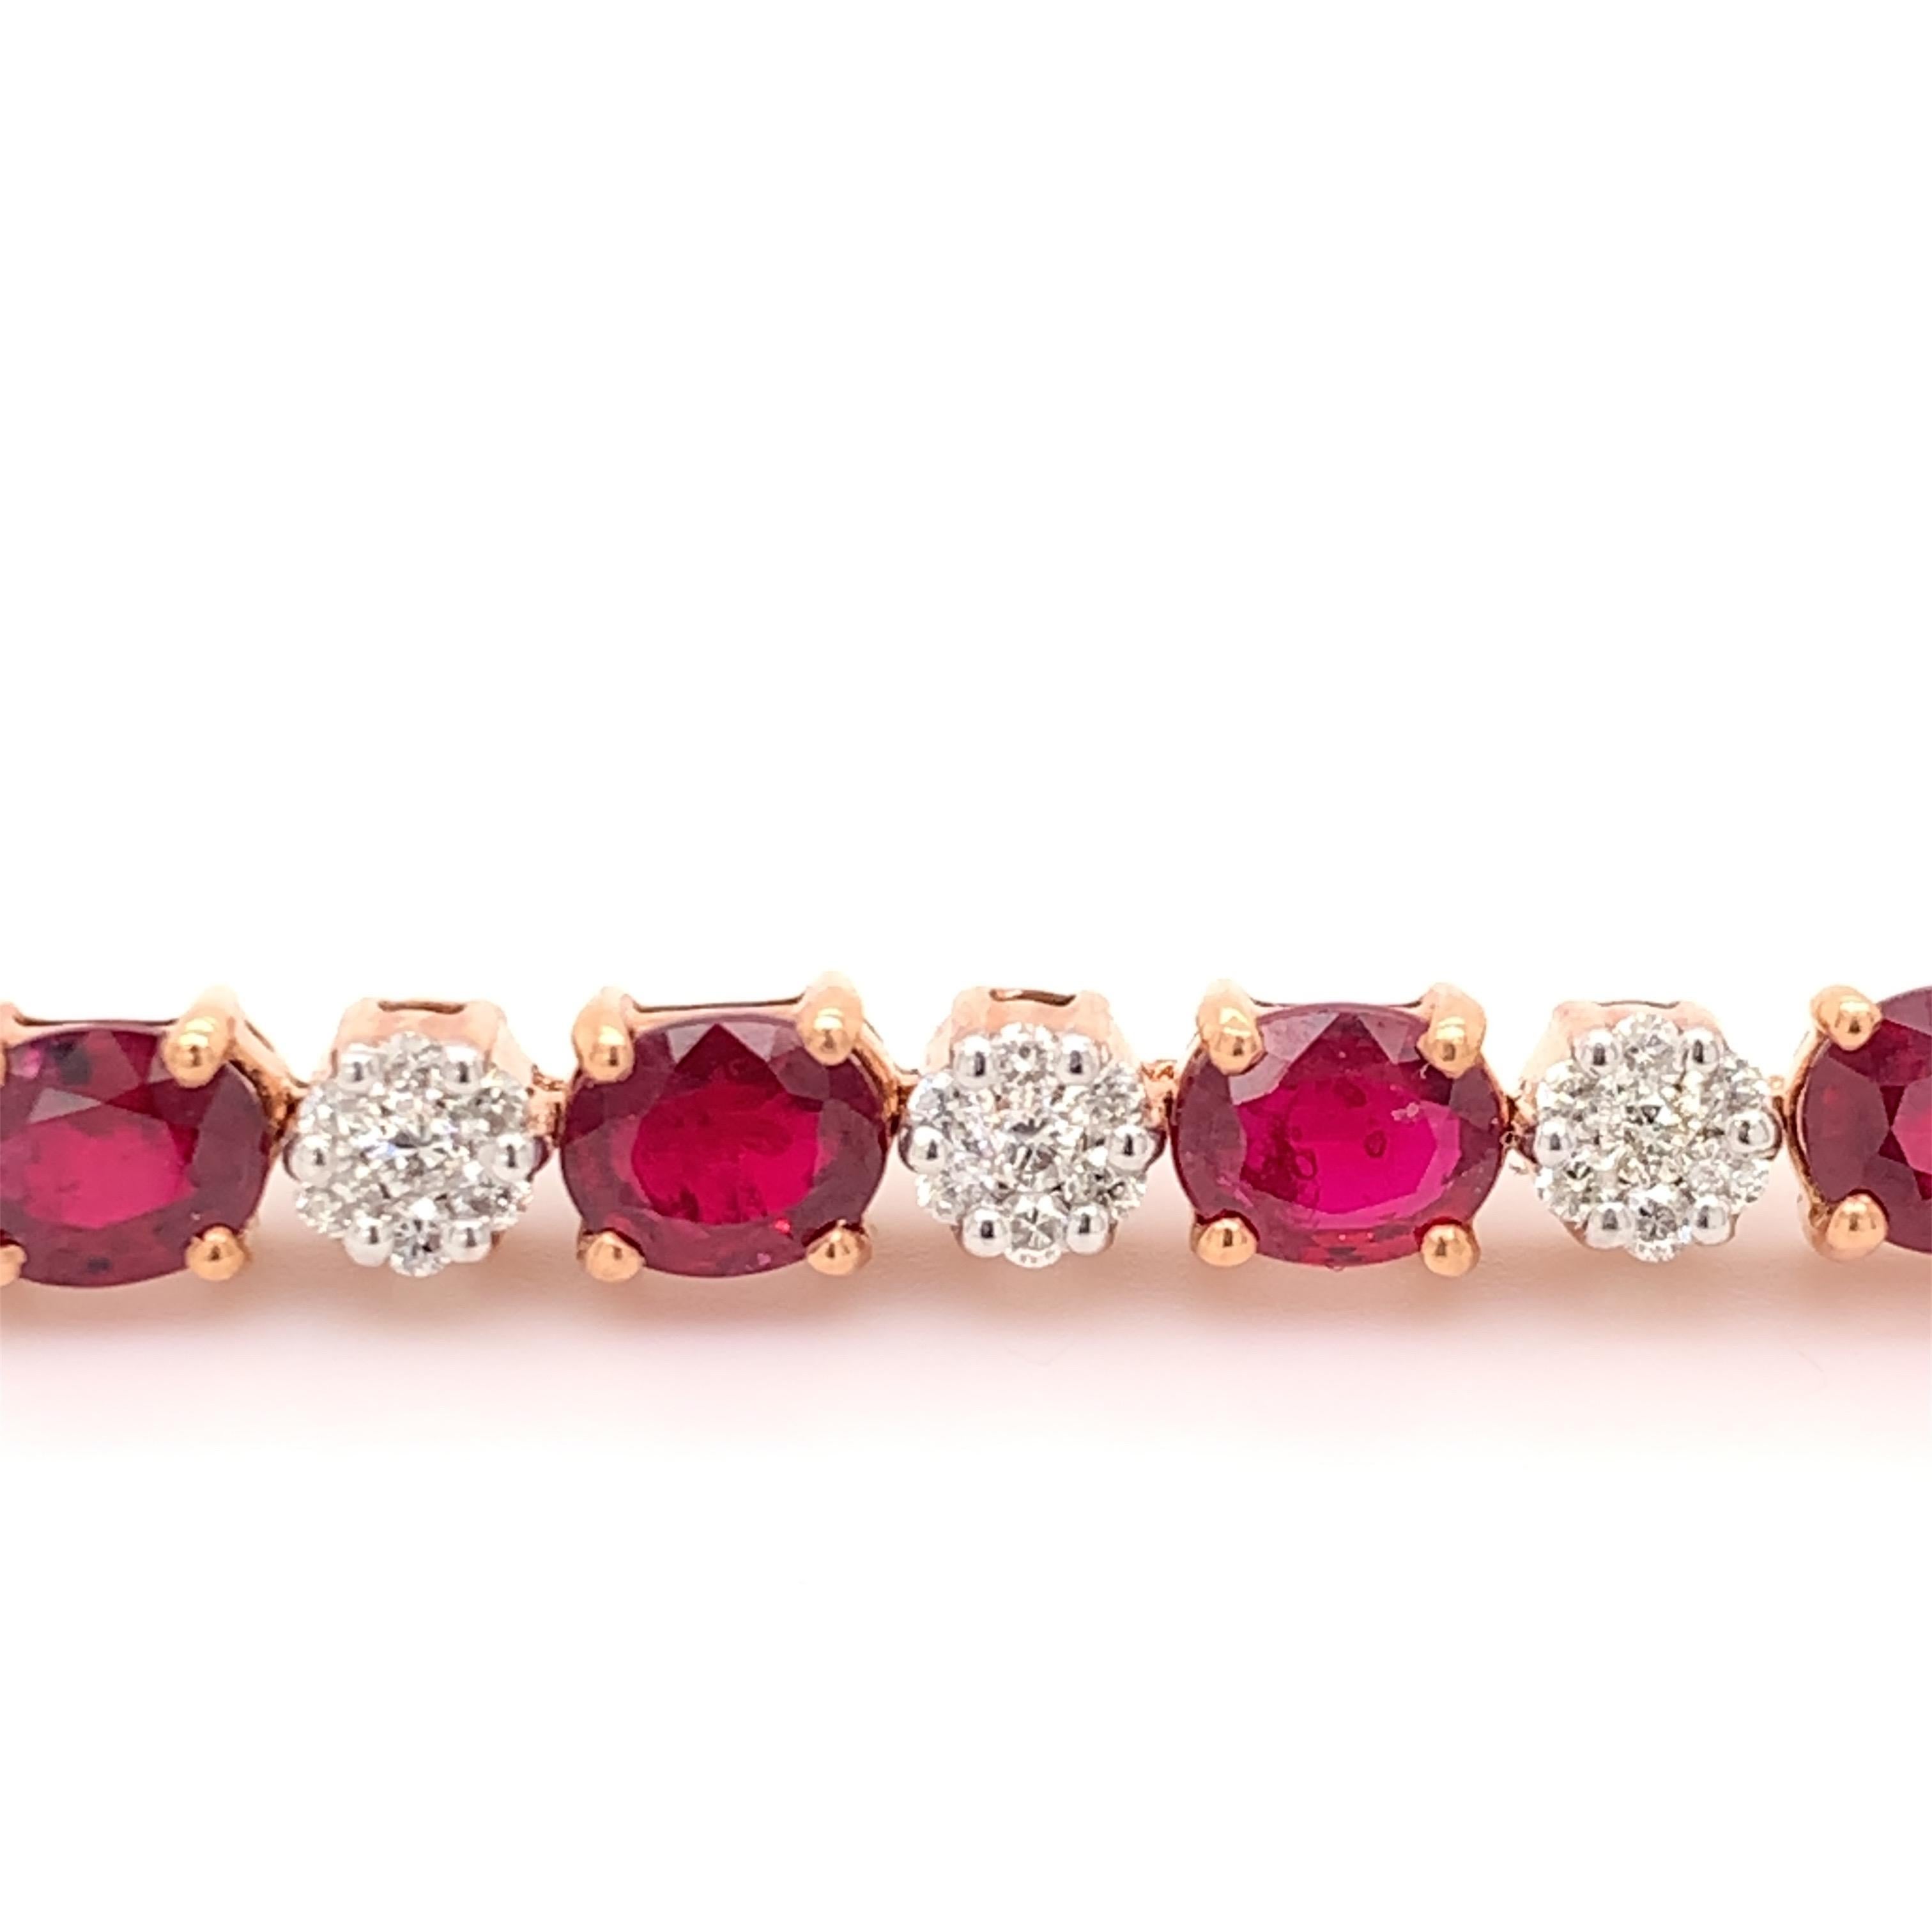 Elegant ruby diamond bracelet. Rich red tone with brilliance, oval faceted, 8.80 carats natural rubies mounted in high profile open basket with bead prongs, accented with a round brilliant cut diamond. Handcrafted design set in 18 karats rose gold